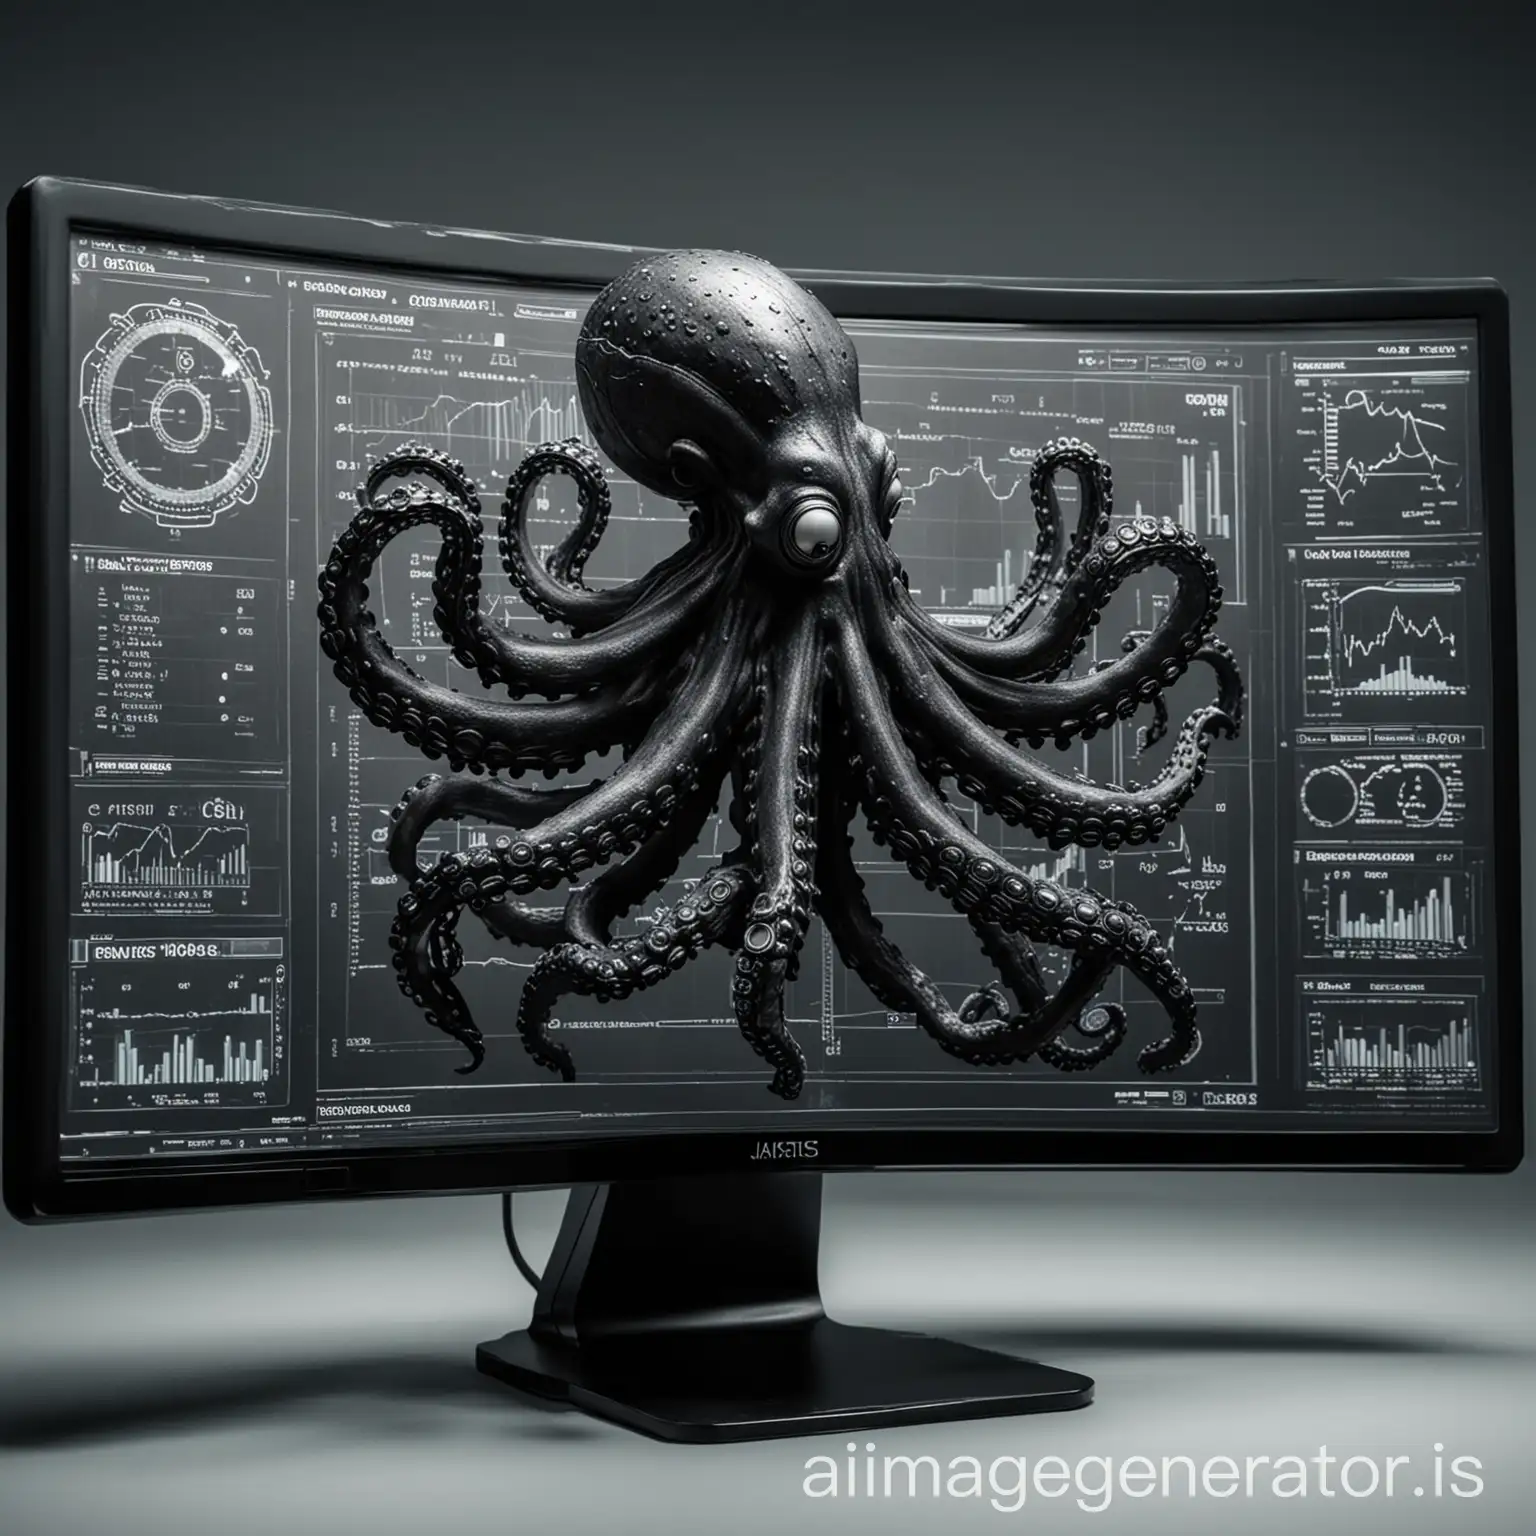 black mechanical octopus computer monitor data and metrics in analytics and administration